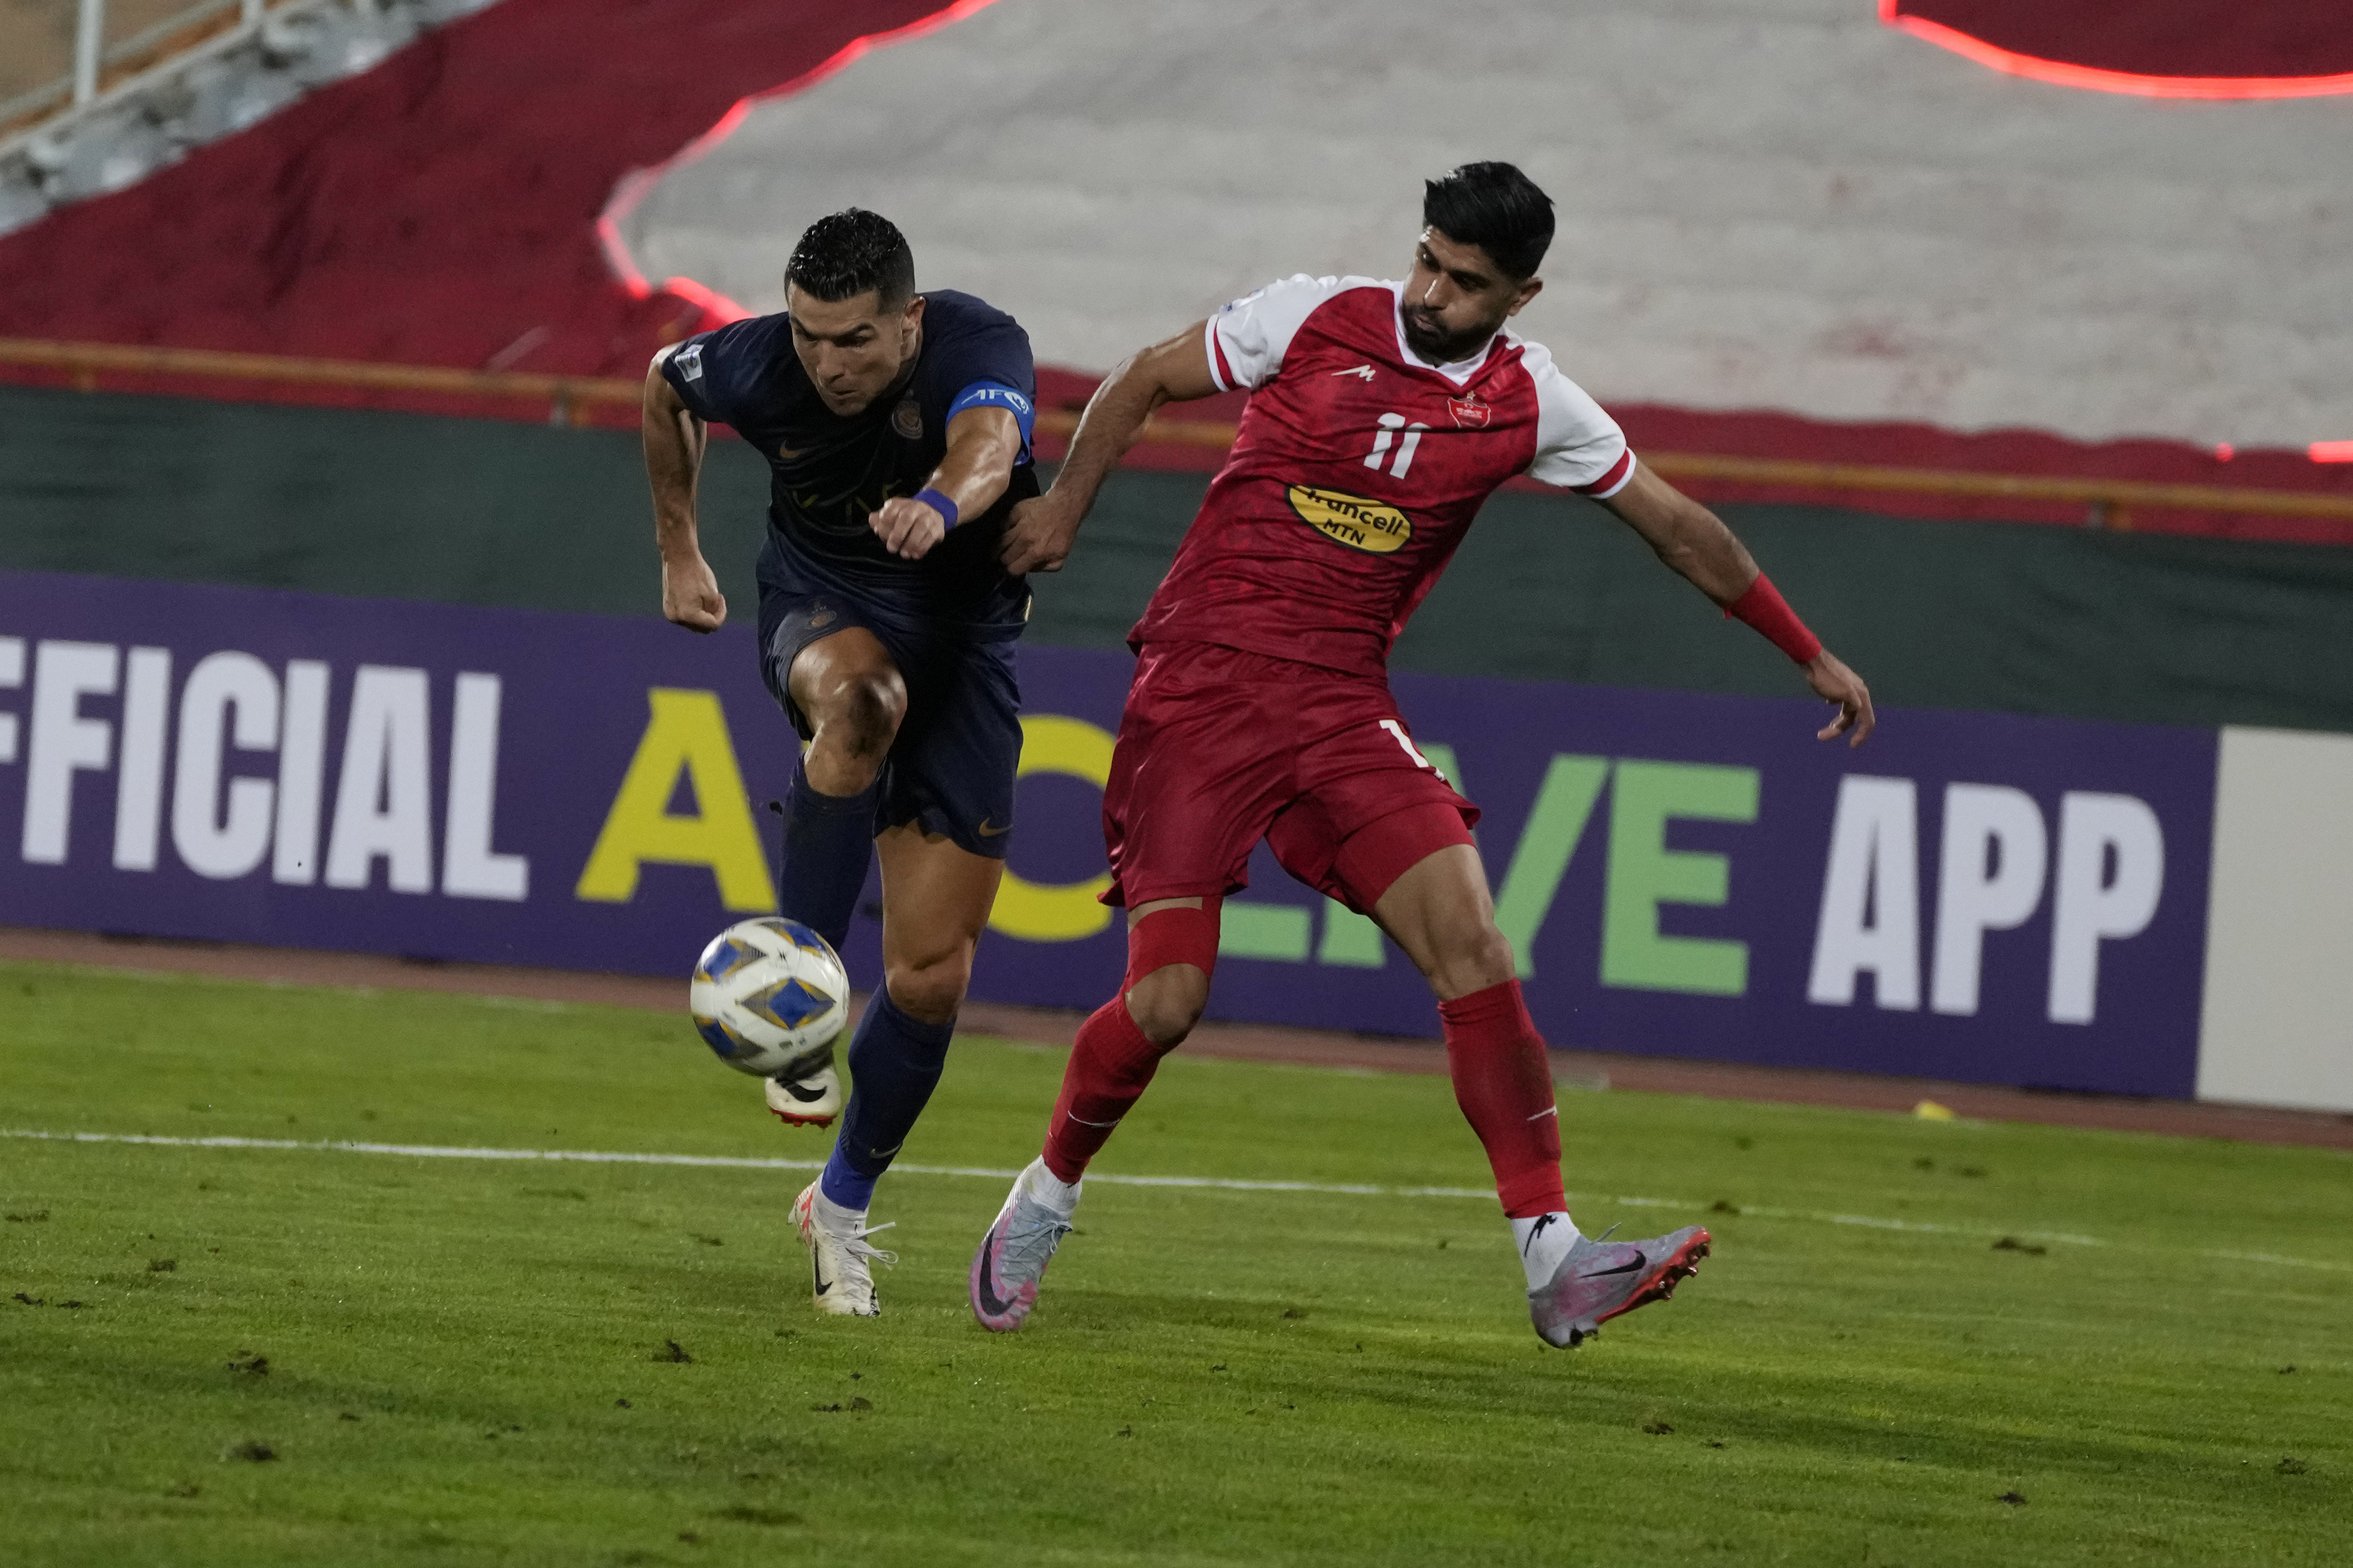 AFC Cup 2021 and AFC Champions League draws: A look at Indian clubs top  performances